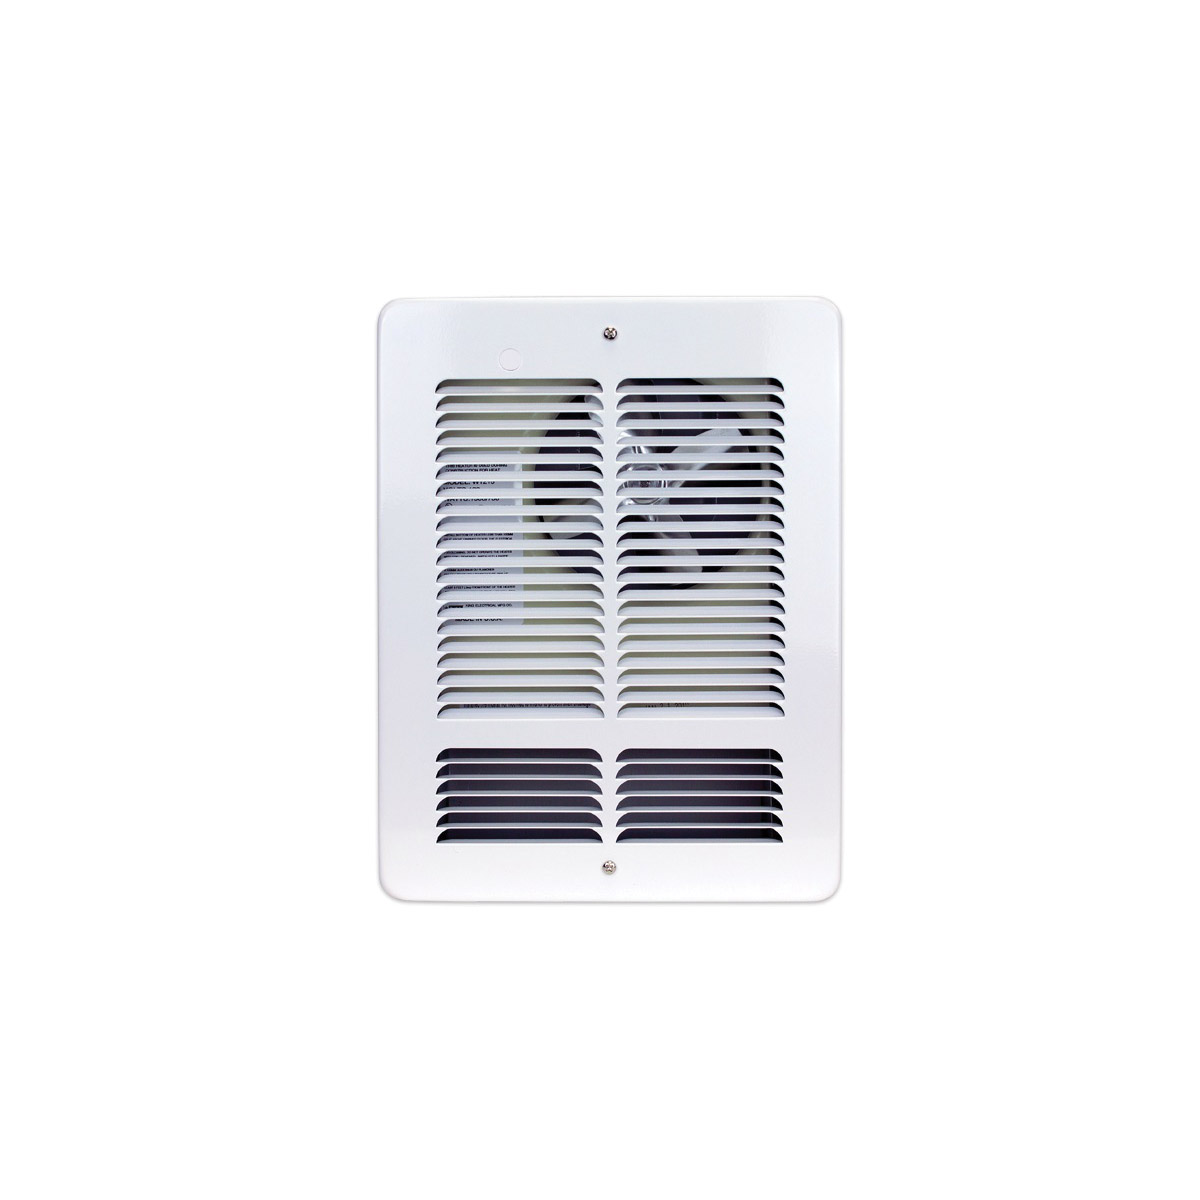 King W Series W2420-W Wall Heater, 4.2/8.3 A, 240 V, 1000/2000 W, 6824 Btu/hr BTU, 600 sq-ft Heating Area, White - 3